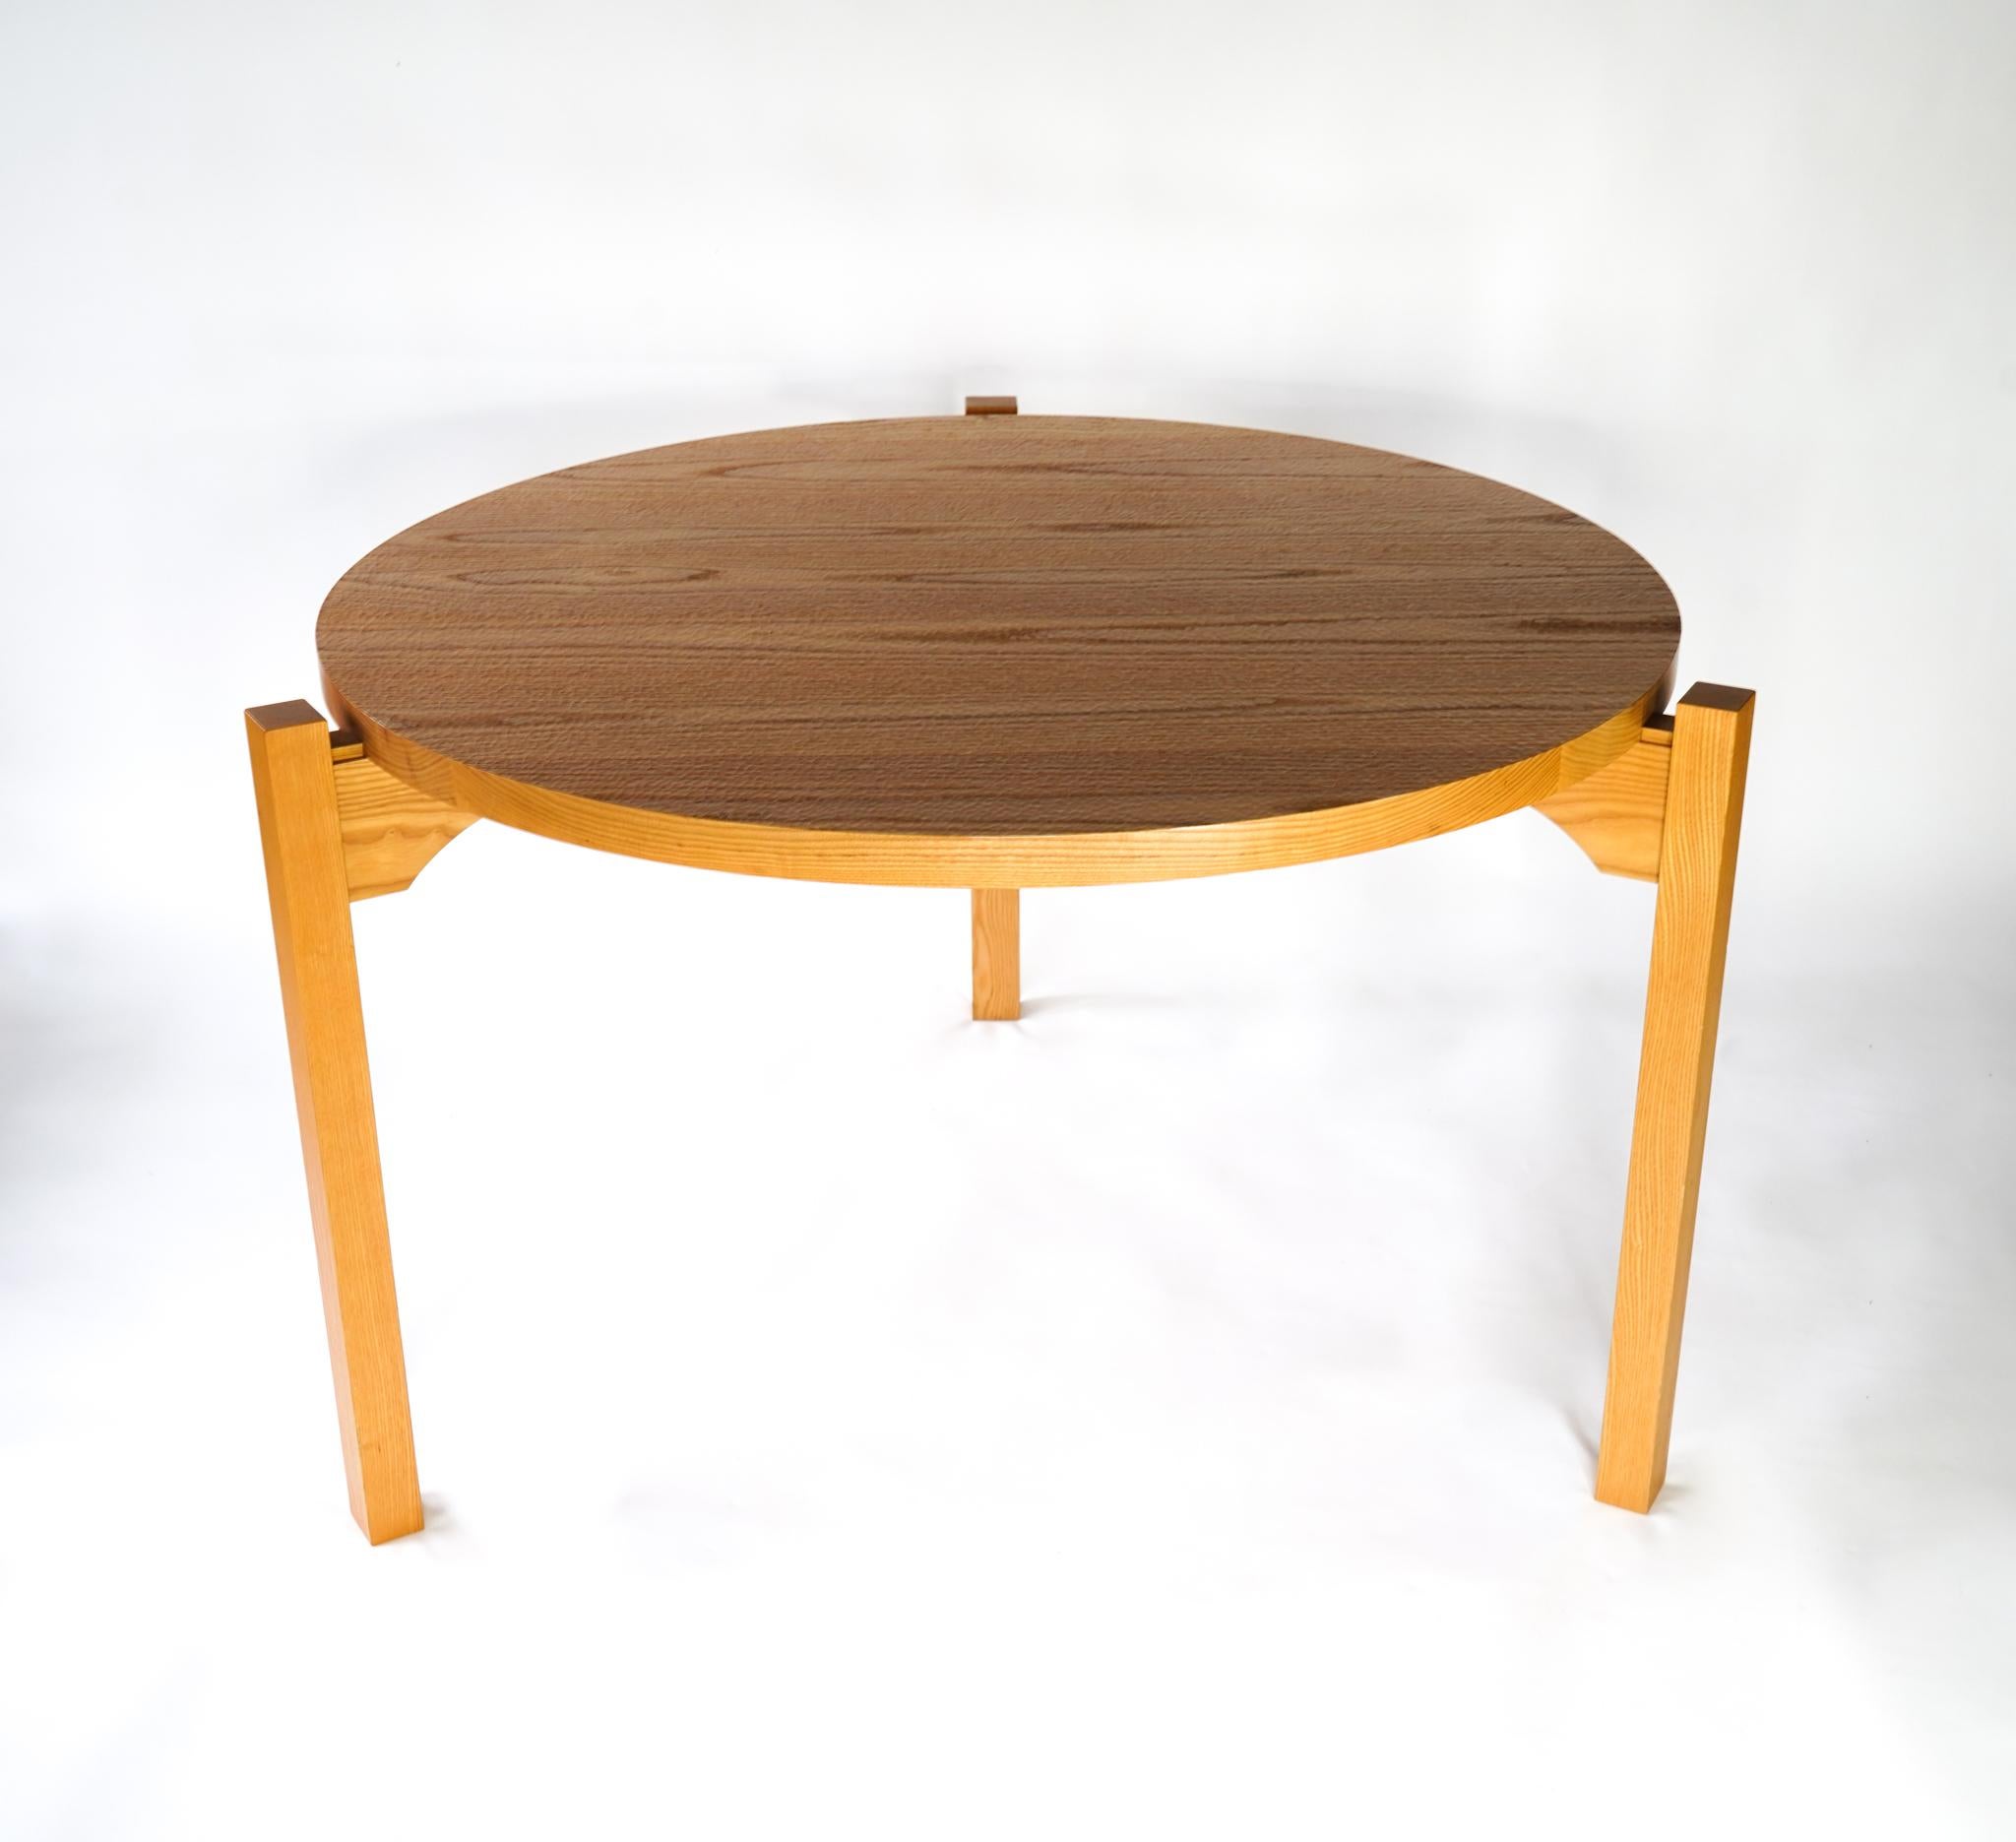 Tadao Arimoto three leg dining table with carved top. Japanese-American master woodworker, Tadao Arimoto's unique dining table featuring three legs that insert into the table top via a grooved joint for ease of assembly/disassembly, moving and